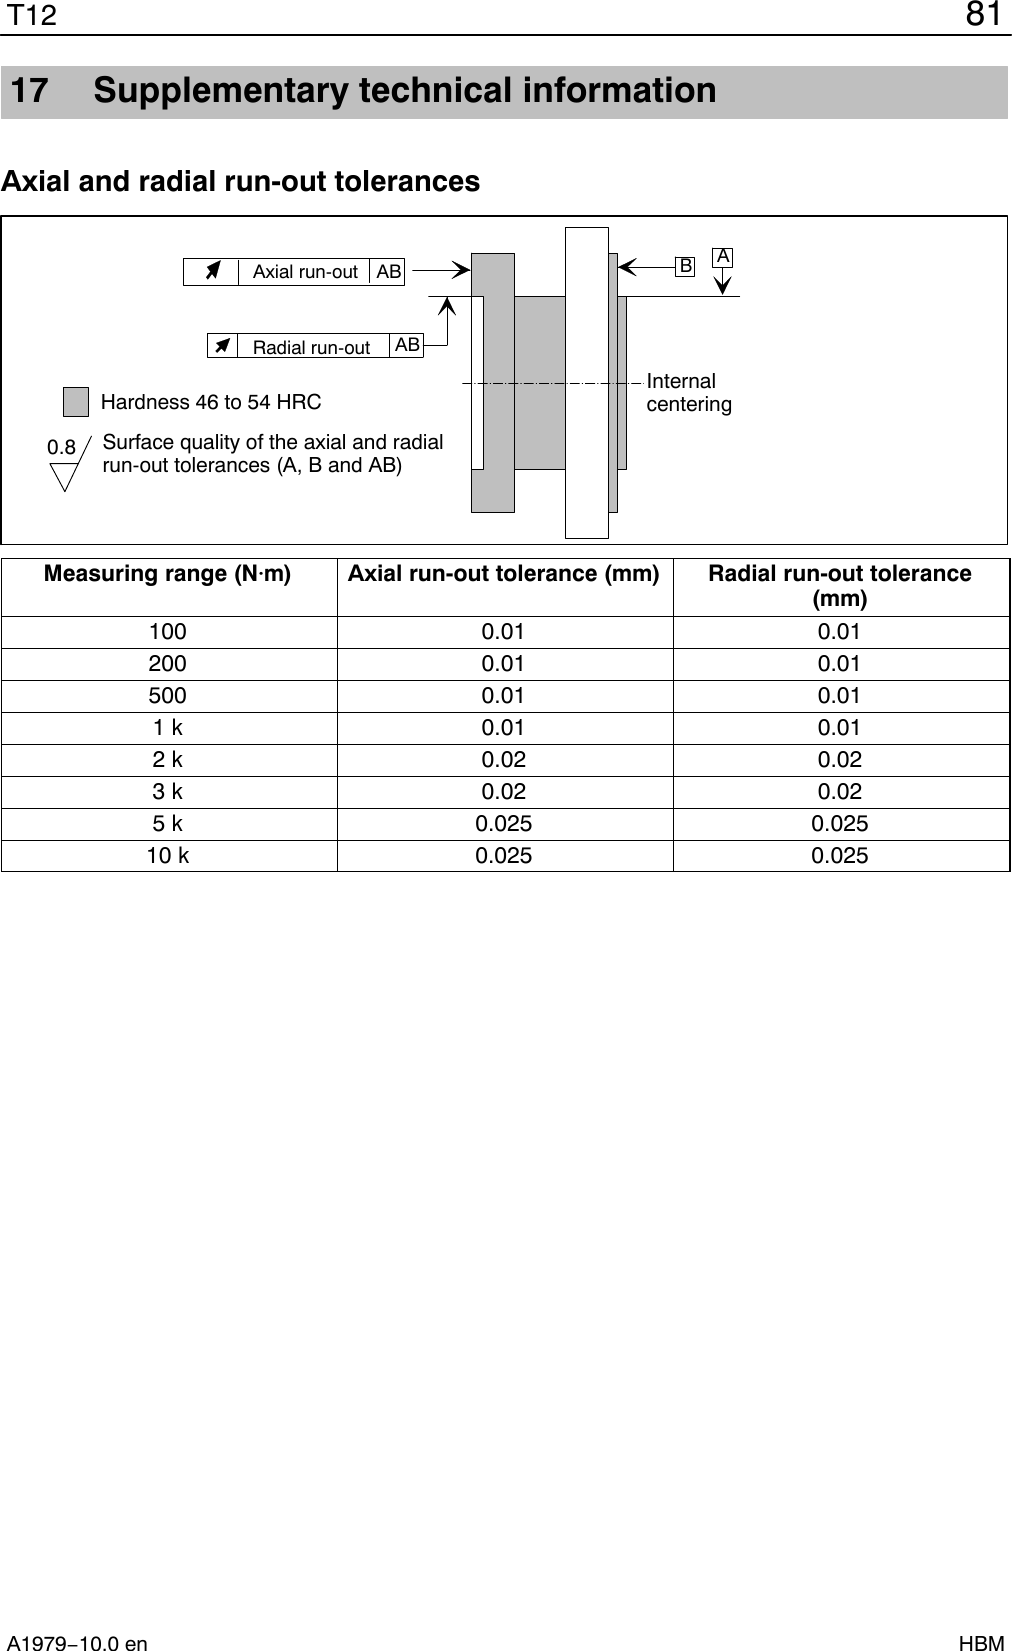 81T12A1979−10.0 en HBM17 Supplementary technical informationAxial and radial run-out tolerancesInternalcenteringAAxial run-out AB BHardness 46 to 54 HRCSurface quality of the axial and radialrun-out tolerances (A, B and AB)0.8Radial run-out ABMeasuring range (NVm) Axial run-out tolerance (mm) Radial run-out tolerance(mm)100 0.01 0.01200 0.01 0.01500 0.01 0.011 k 0.01 0.012 k 0.02 0.023 k 0.02 0.025 k 0.025 0.02510 k 0.025 0.025